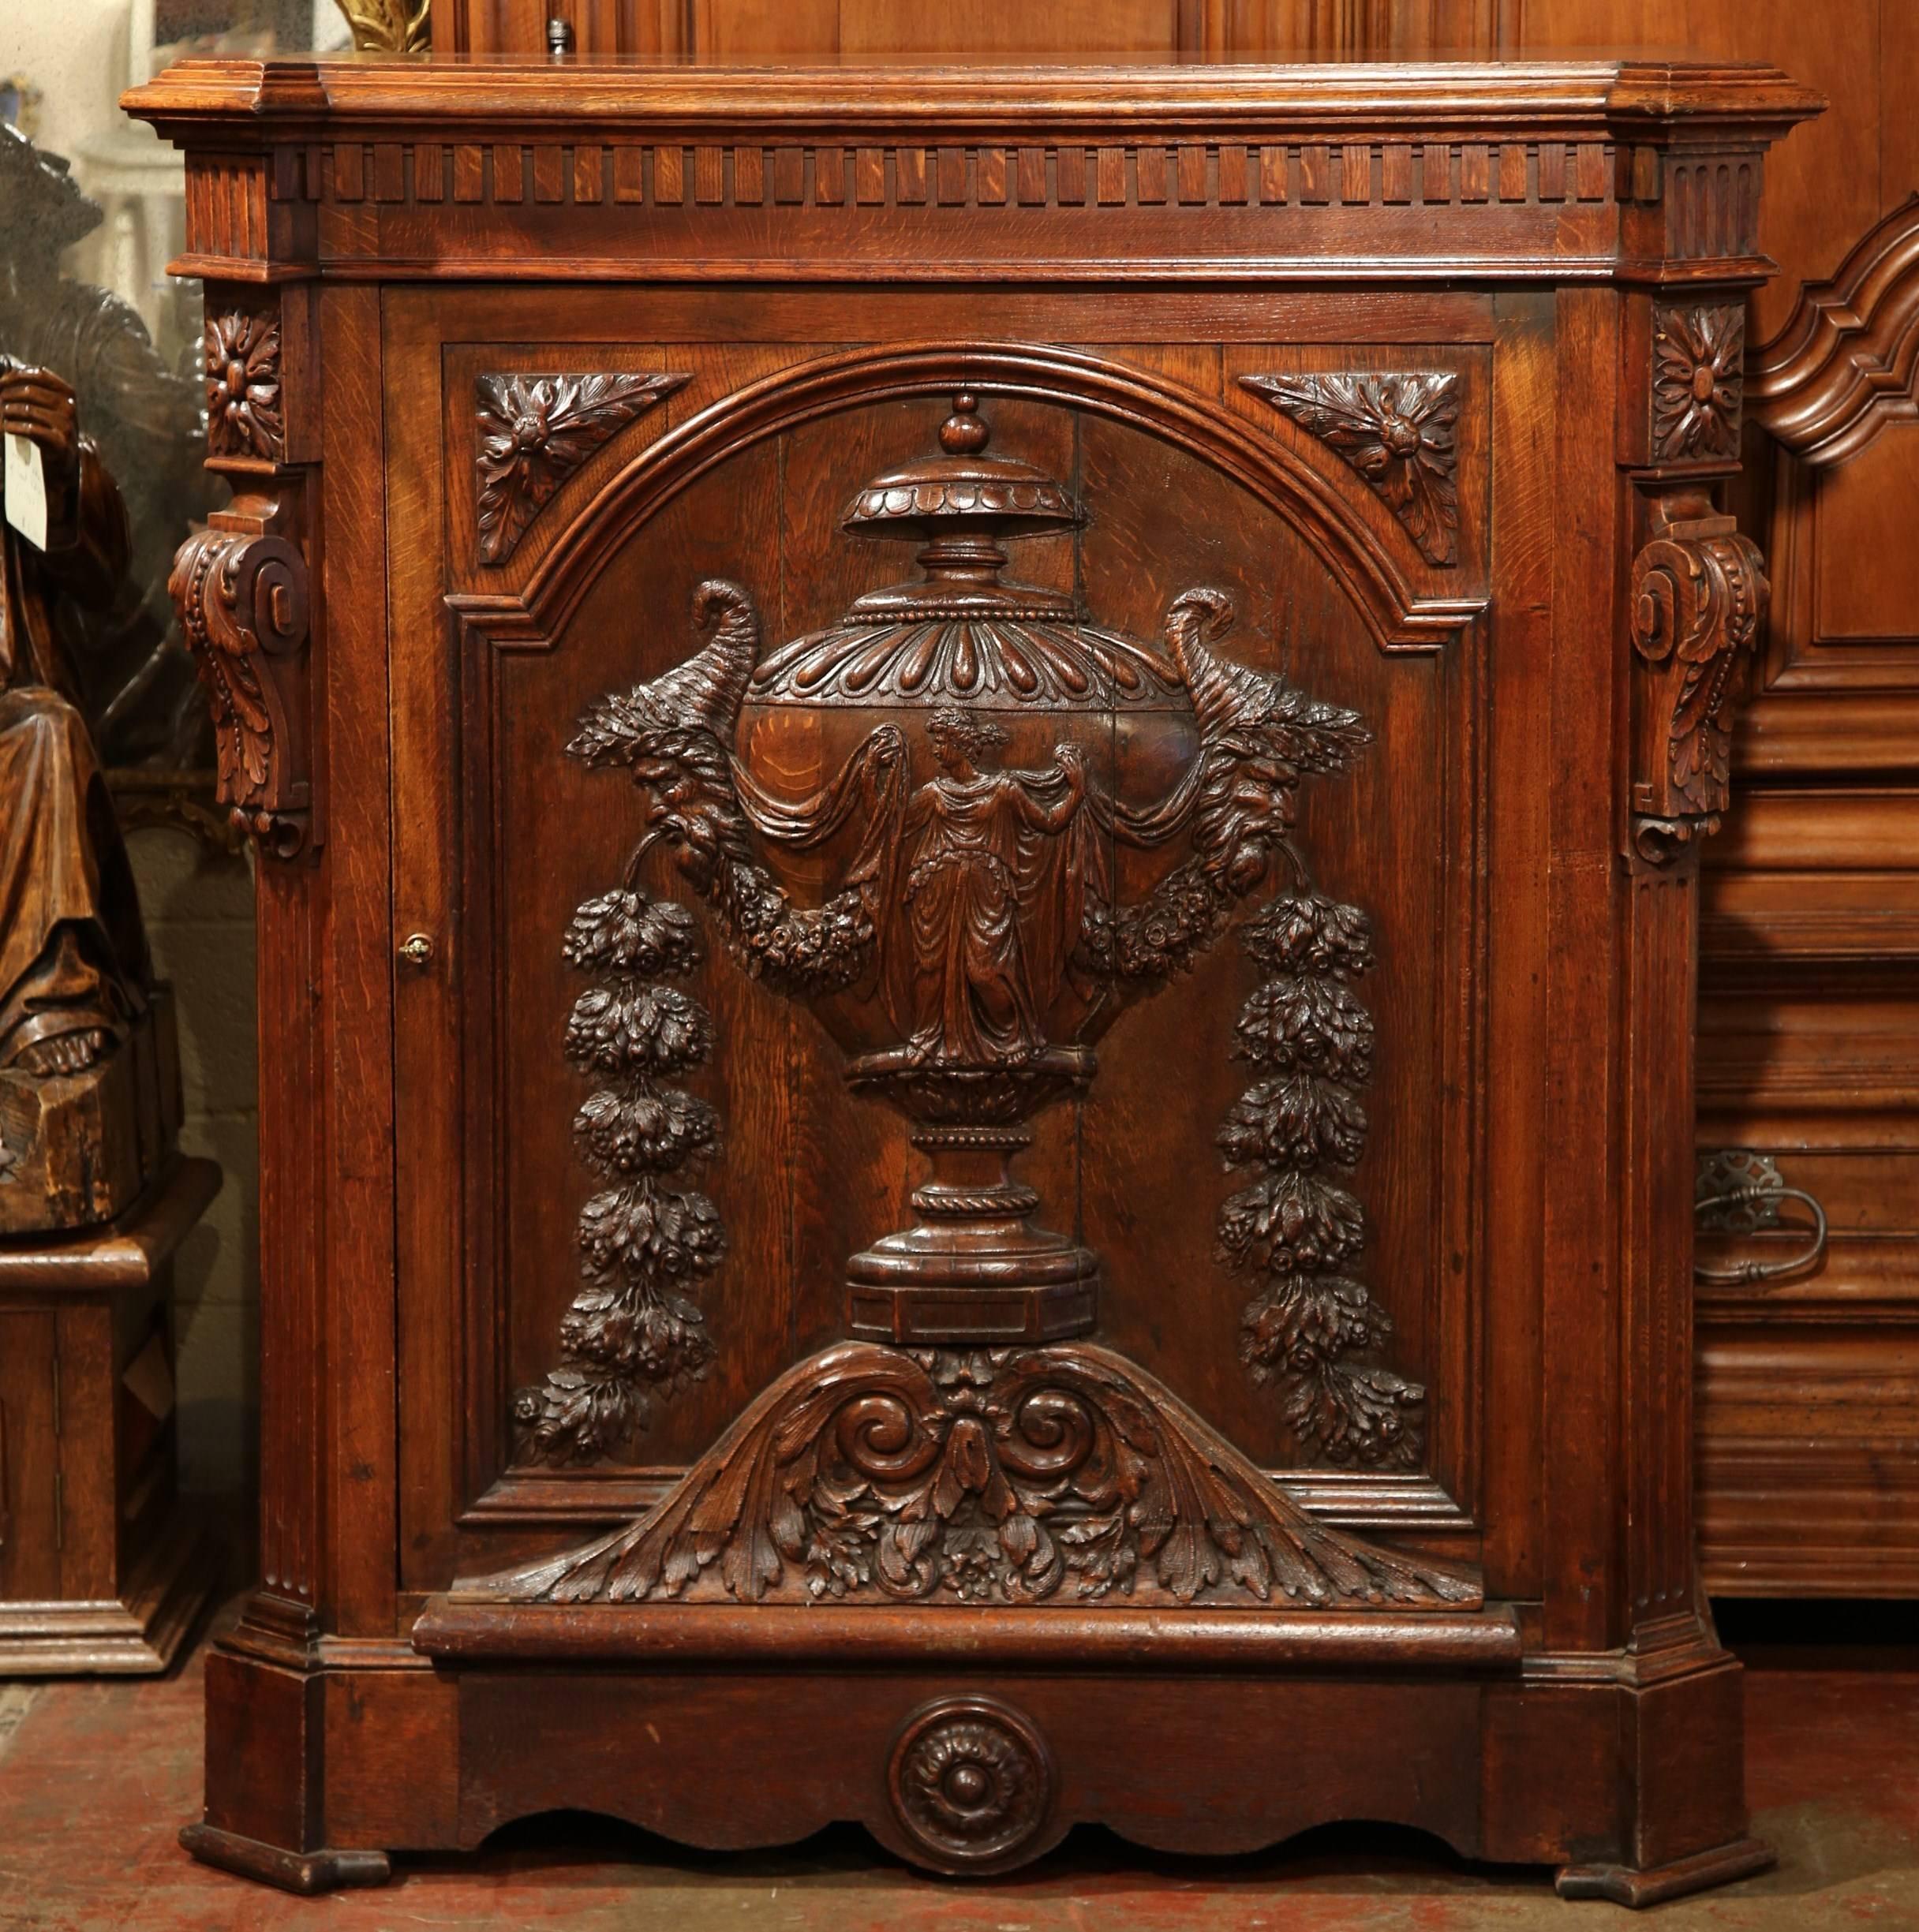 Keep your home organized with this 19th century carved cabinet. Crafted in France, circa 1870, this single door confiturier, or jelly cabinet, features a beautifully carved vase with floral swags on the central door, smaller carved details